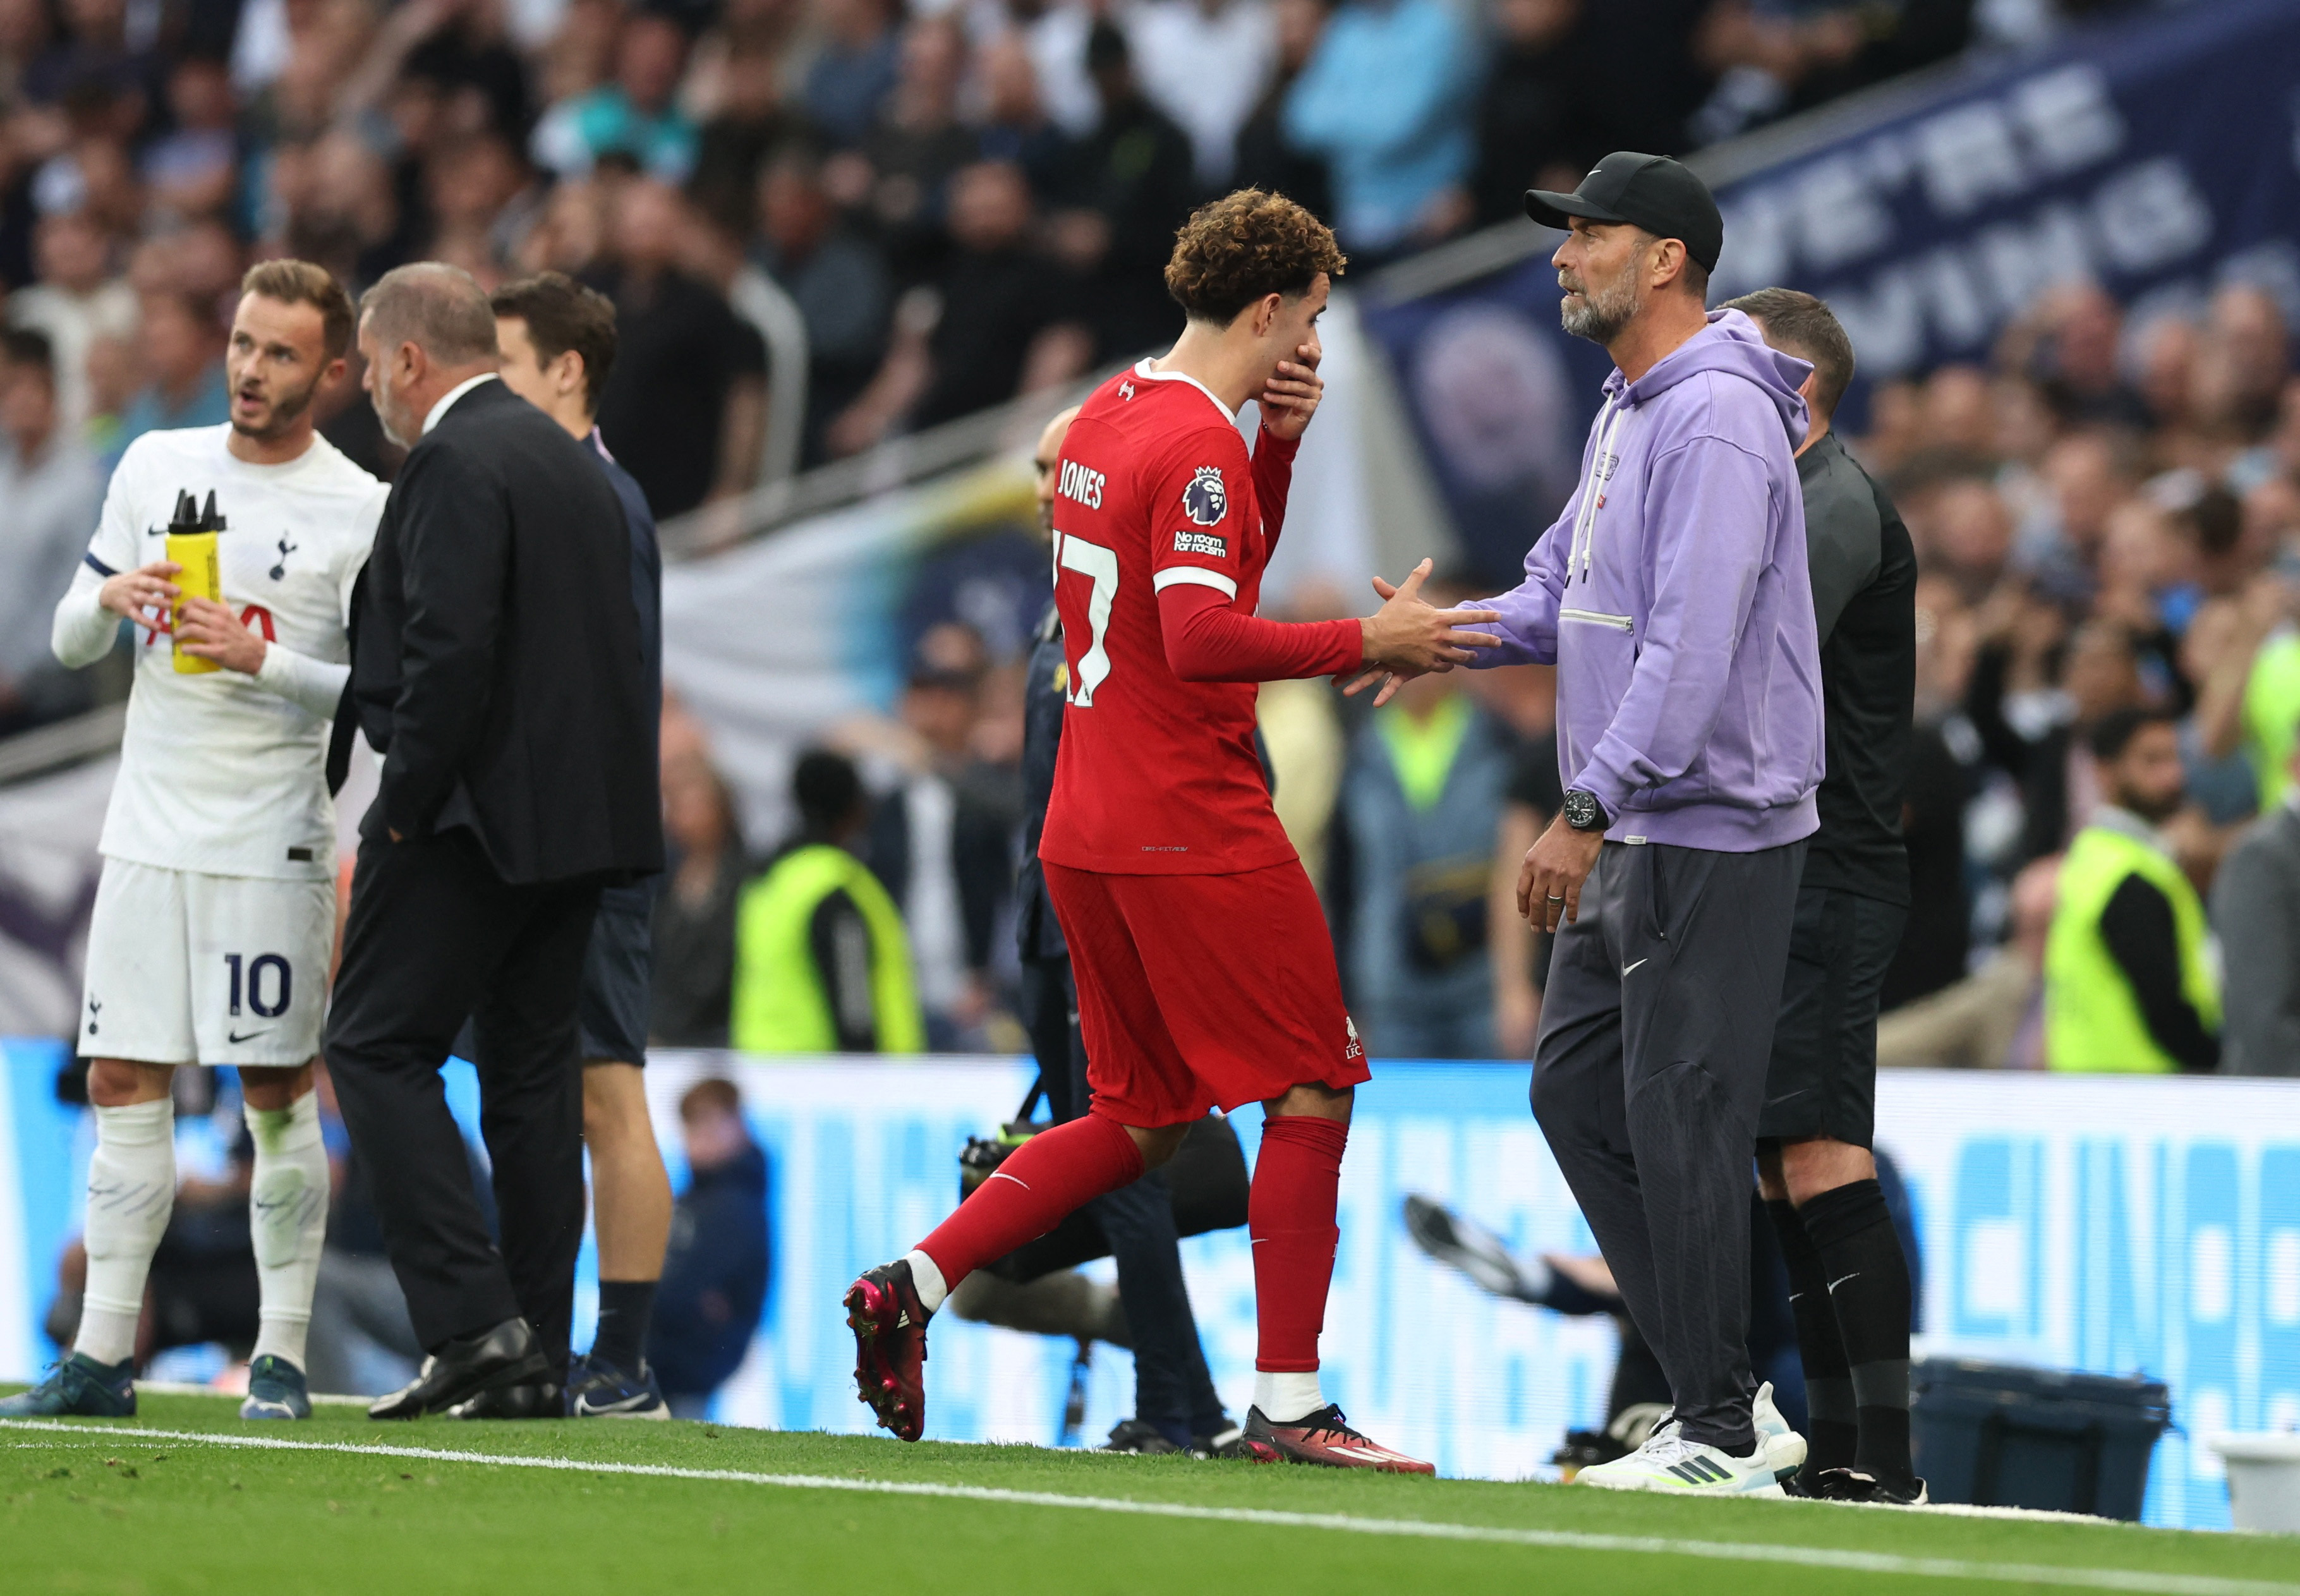 VAR officials replaced after offside error in Liverpool defeat Reuters